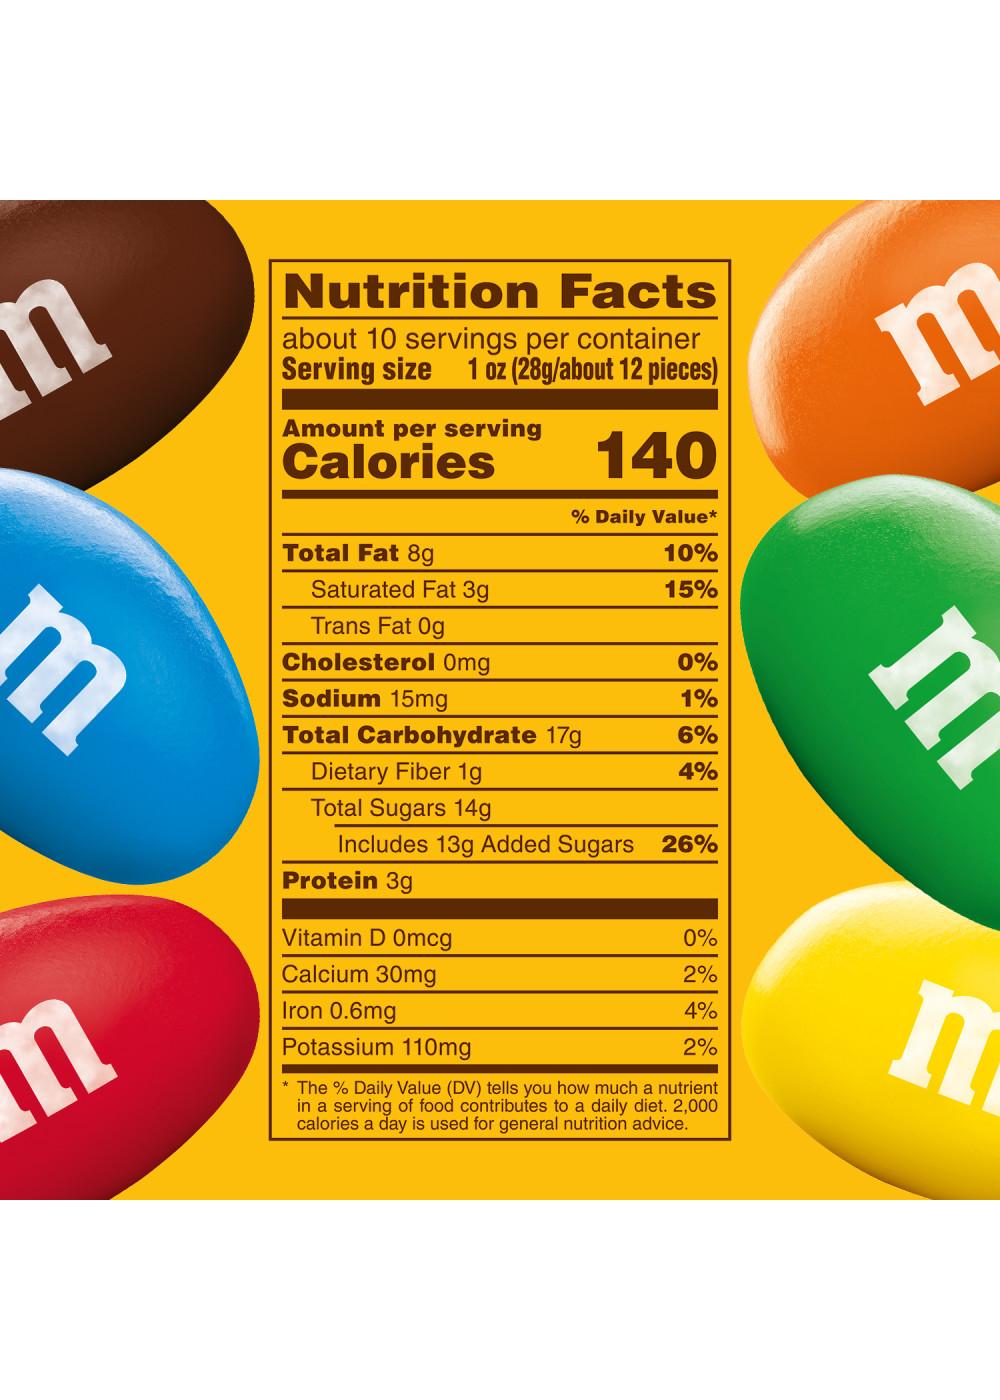 M&M'S Crunchy Cookie Chocolate Candy - Sharing Size - Shop Candy at H-E-B